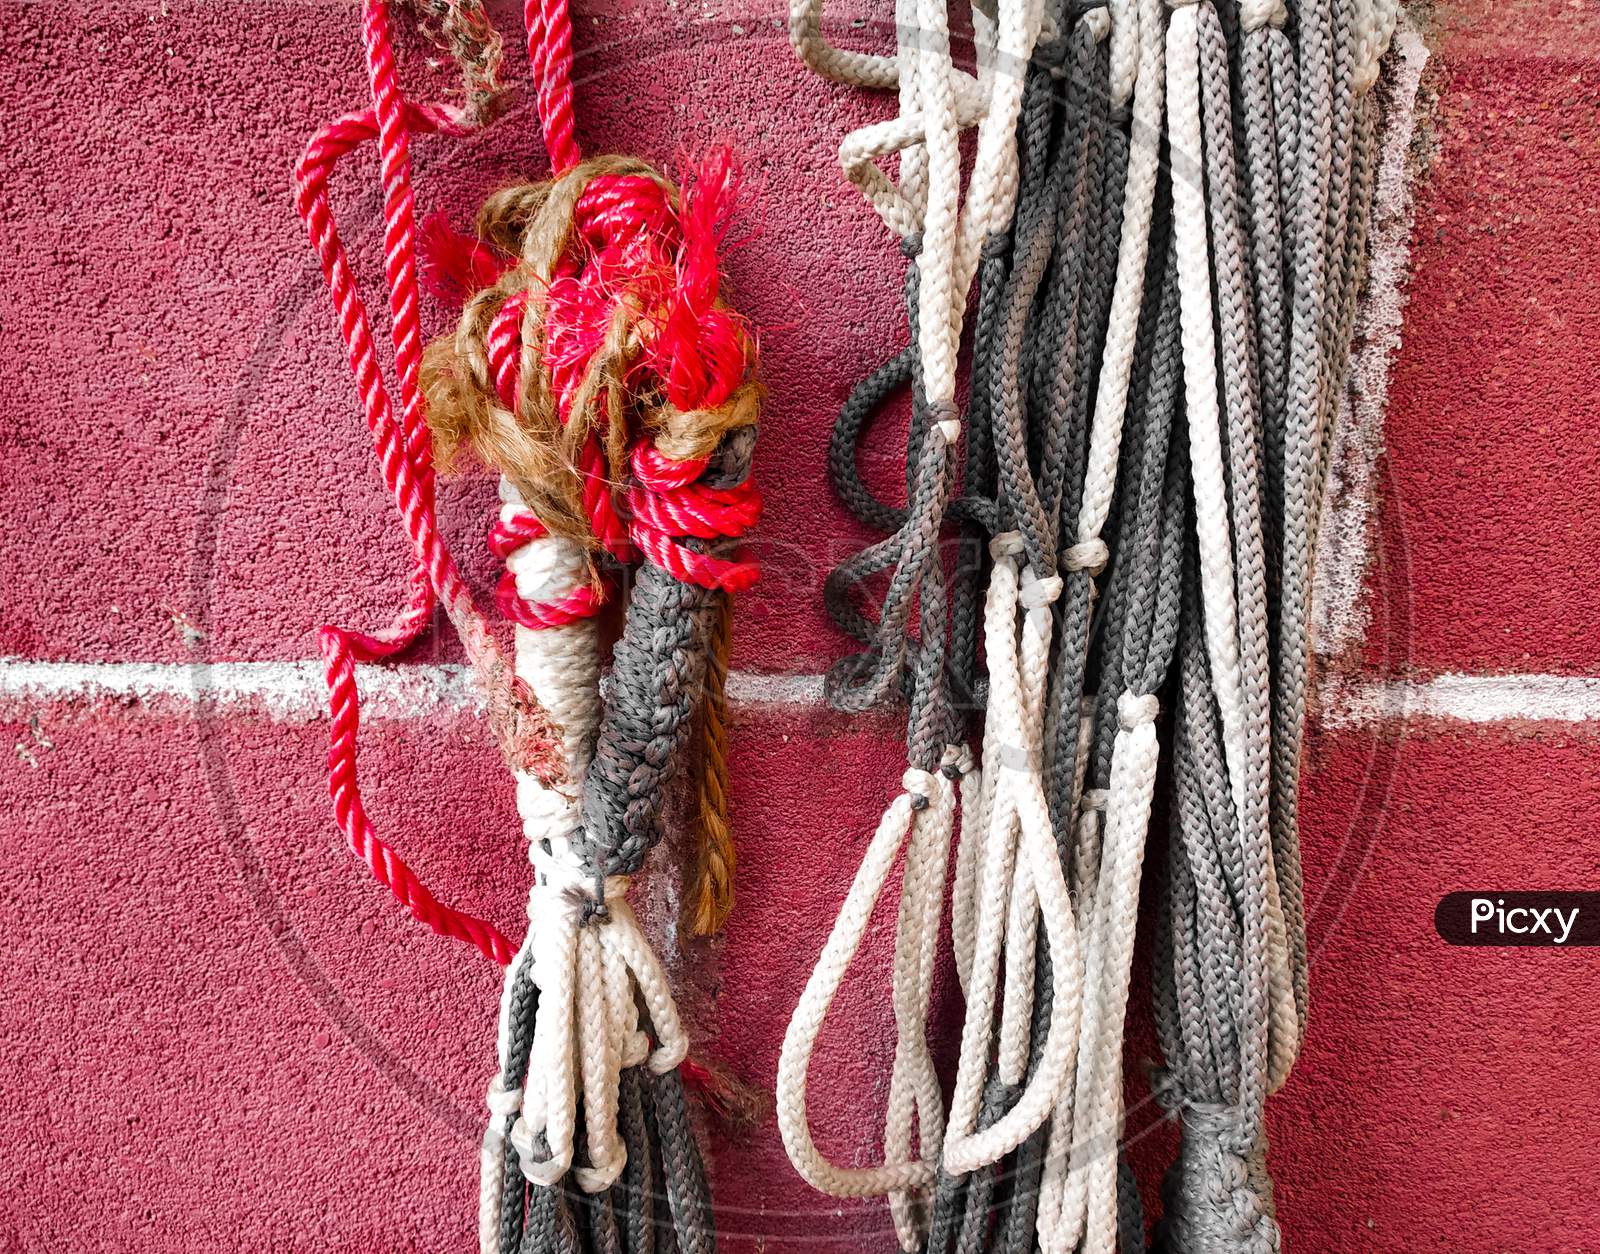 nylon rope , parachute cord on a red brick wall